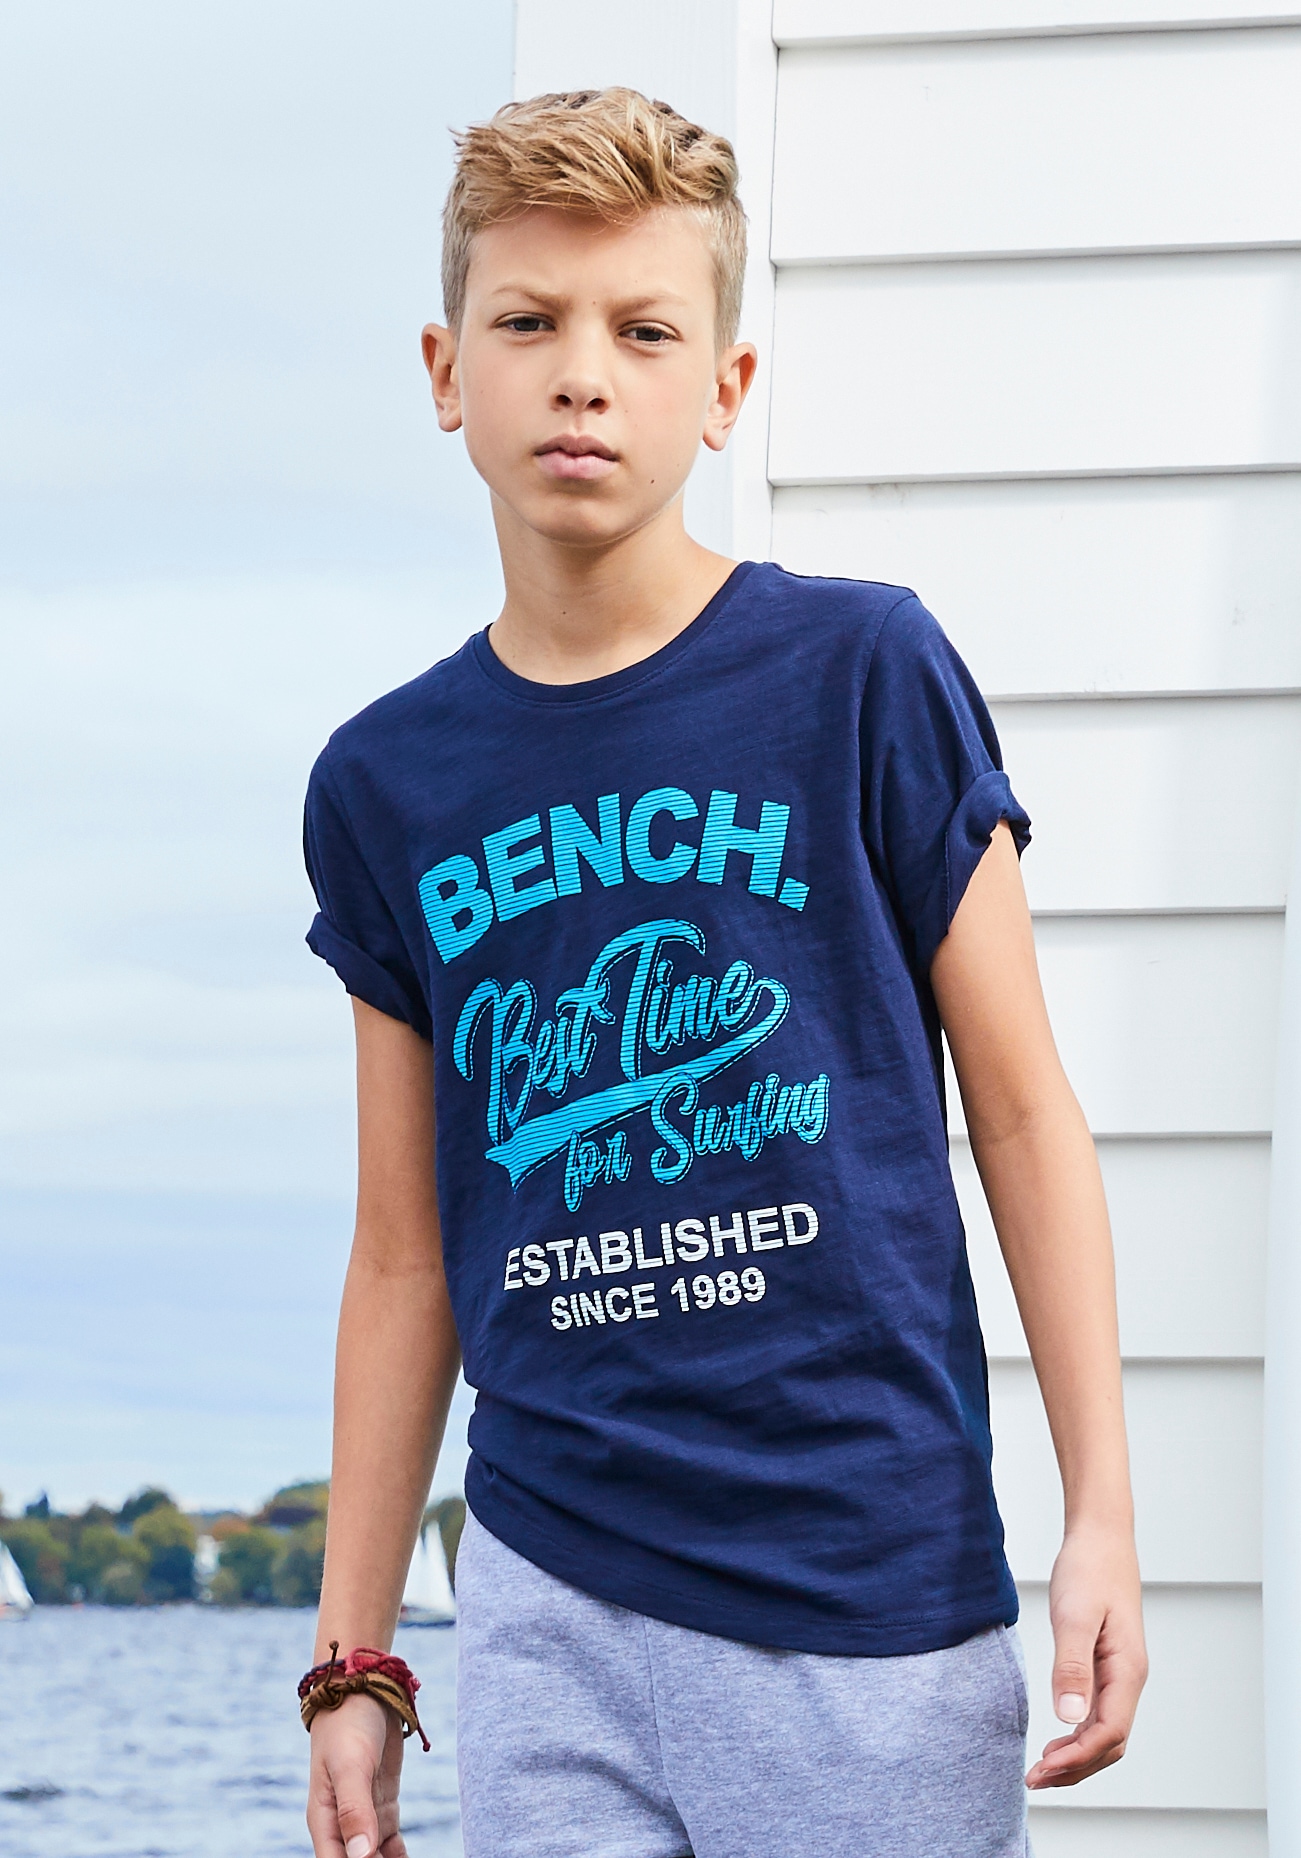 OTTO Bench. T-Shirt for »Best time surfing« bei